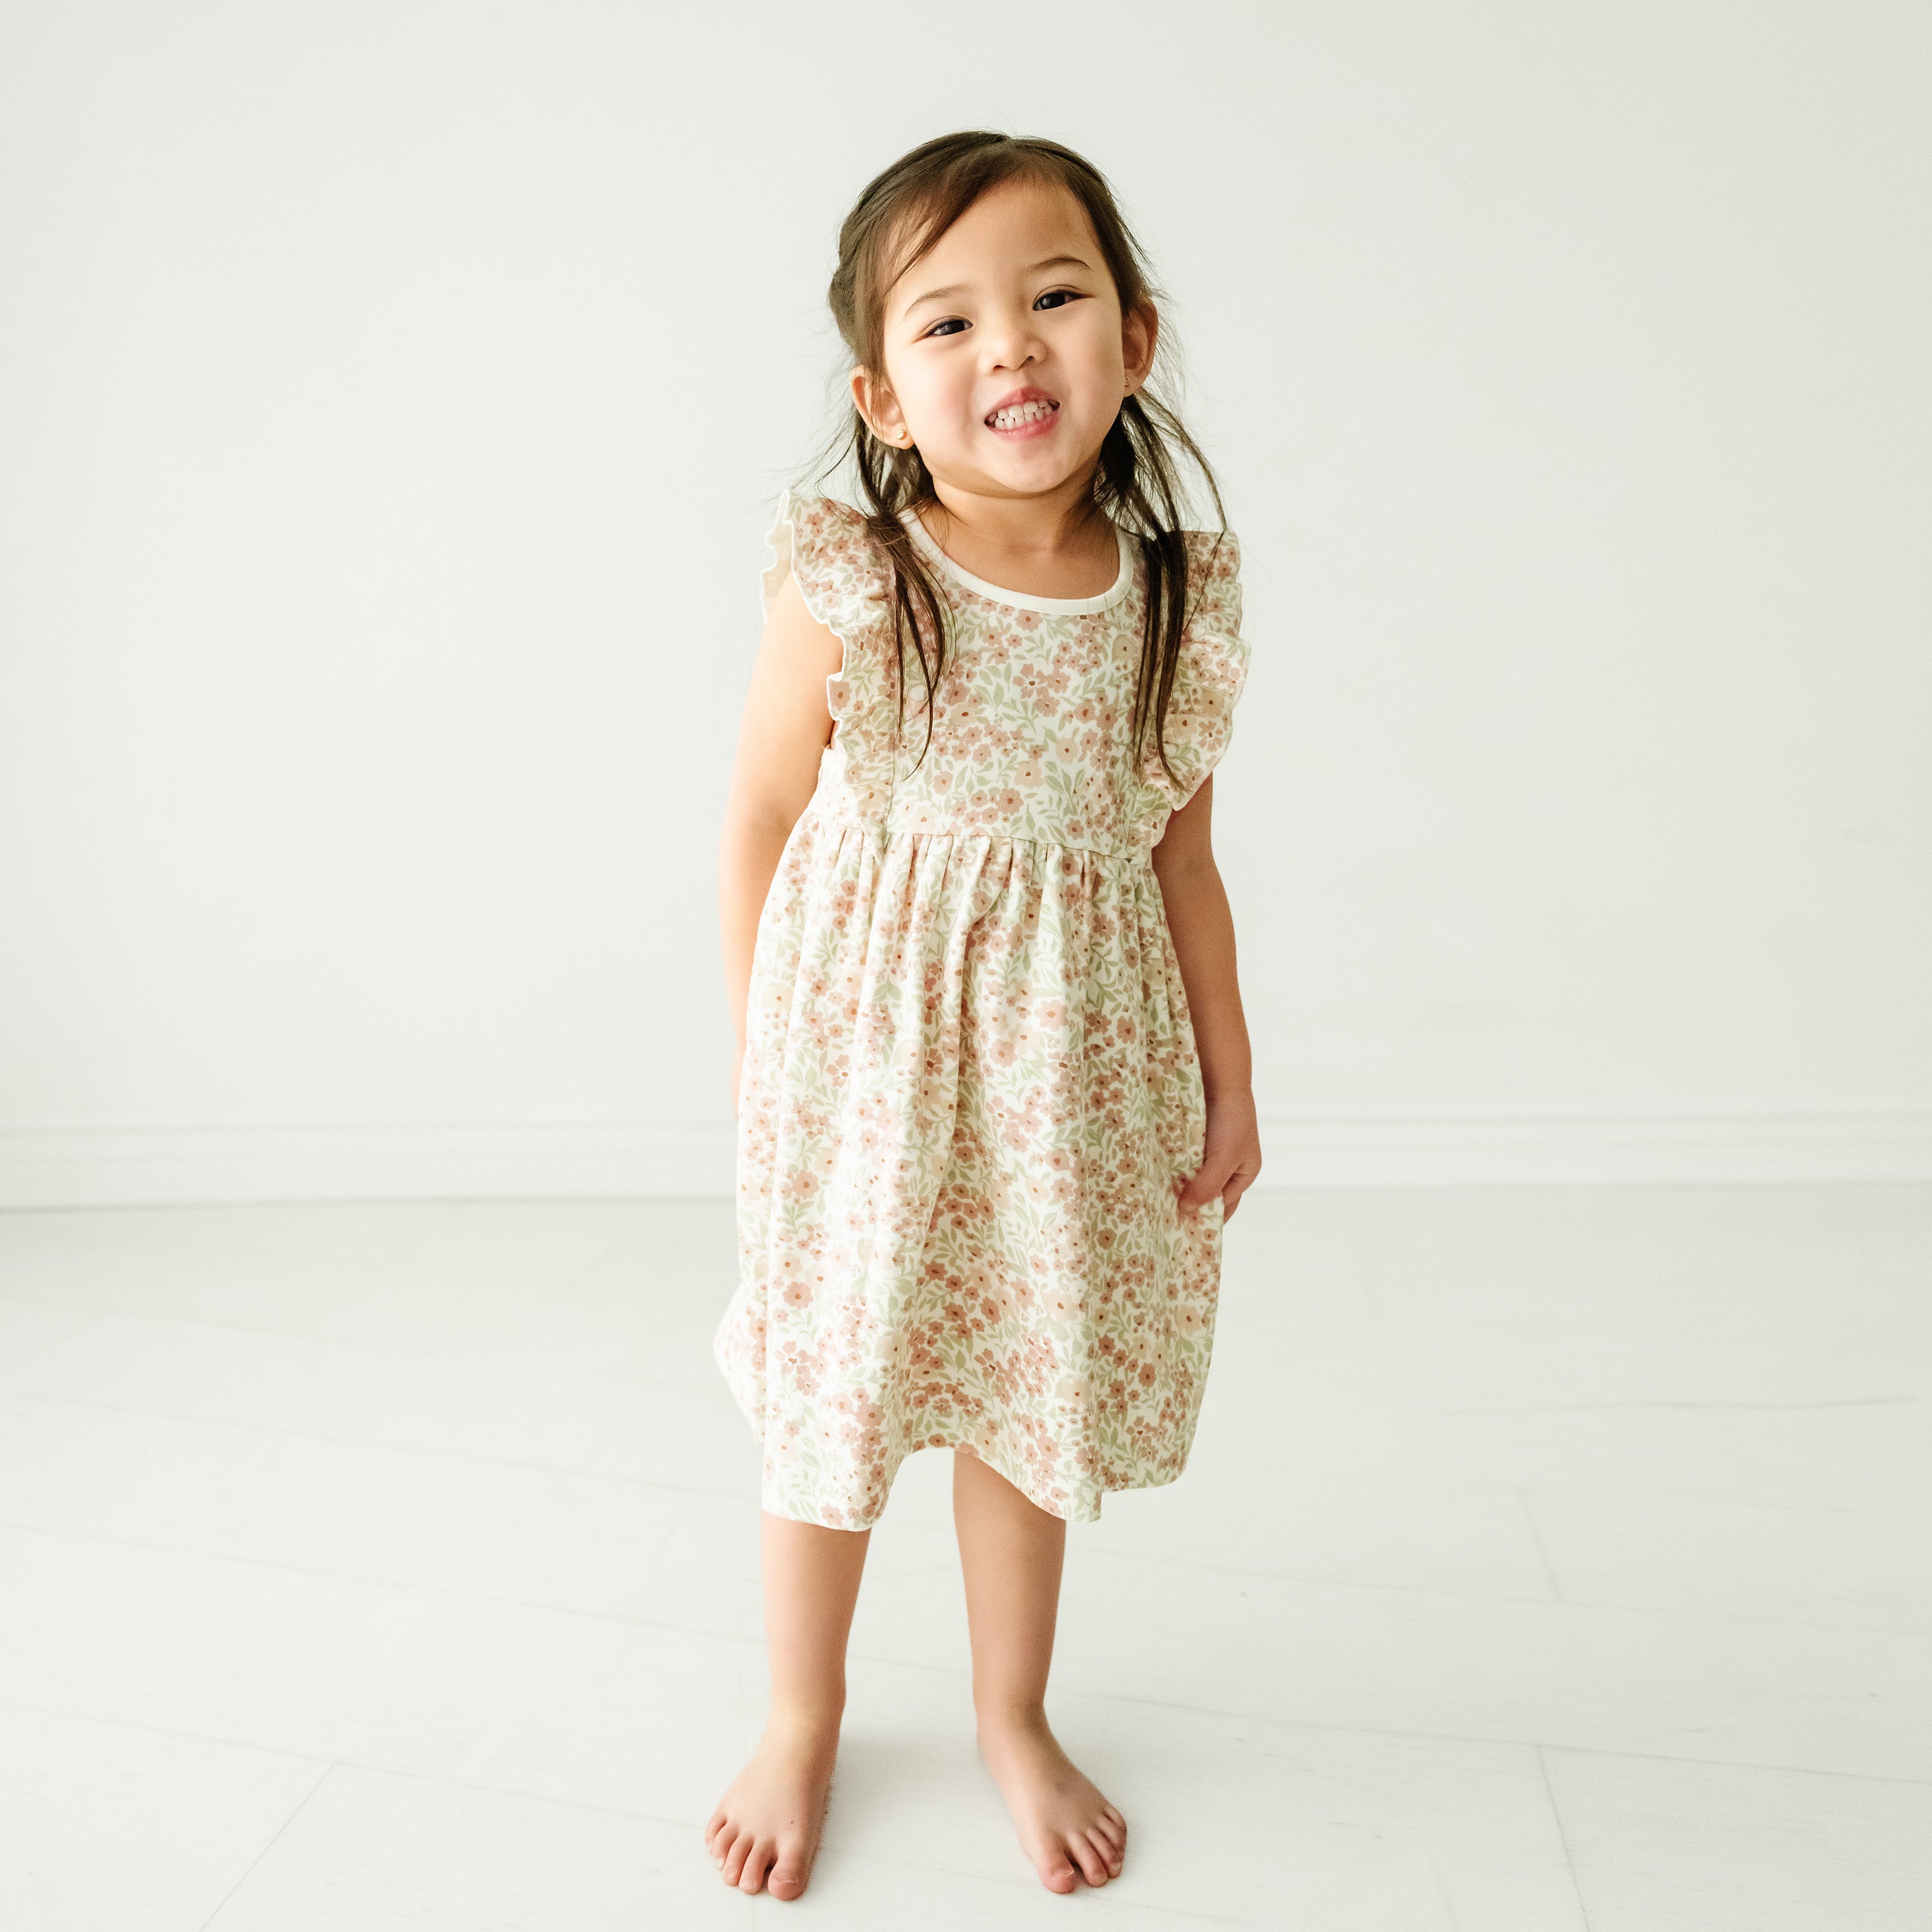 A toddler with long hair in a Organic Flutter Dress - Summer Floral by Makemake Organics stands smiling in a bright, white studio room.